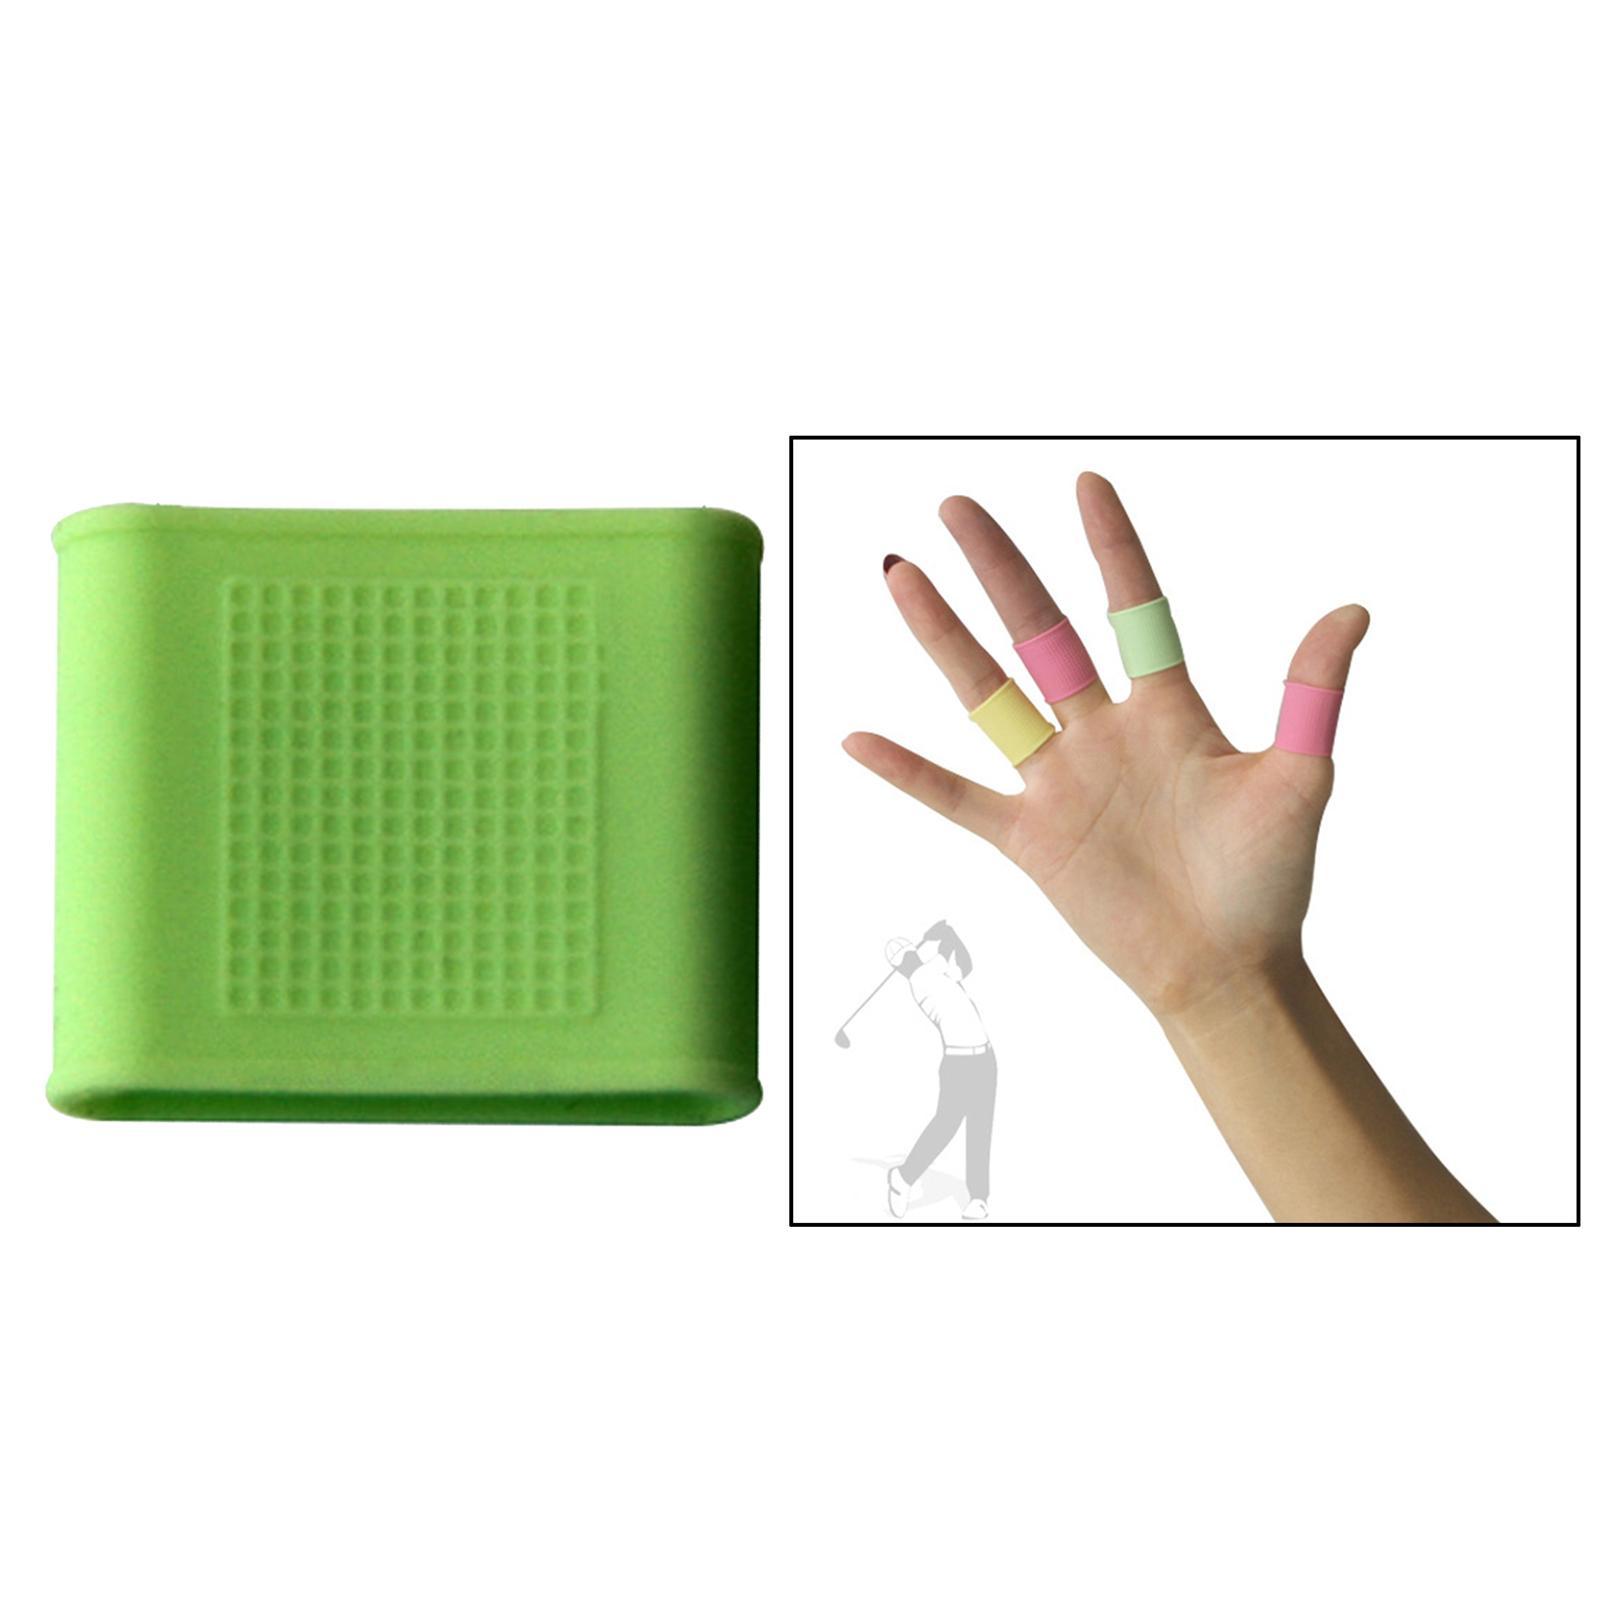 3xSoft Golf Finger Sleeves Silicone Protector Support Wrap Light Green 23mm